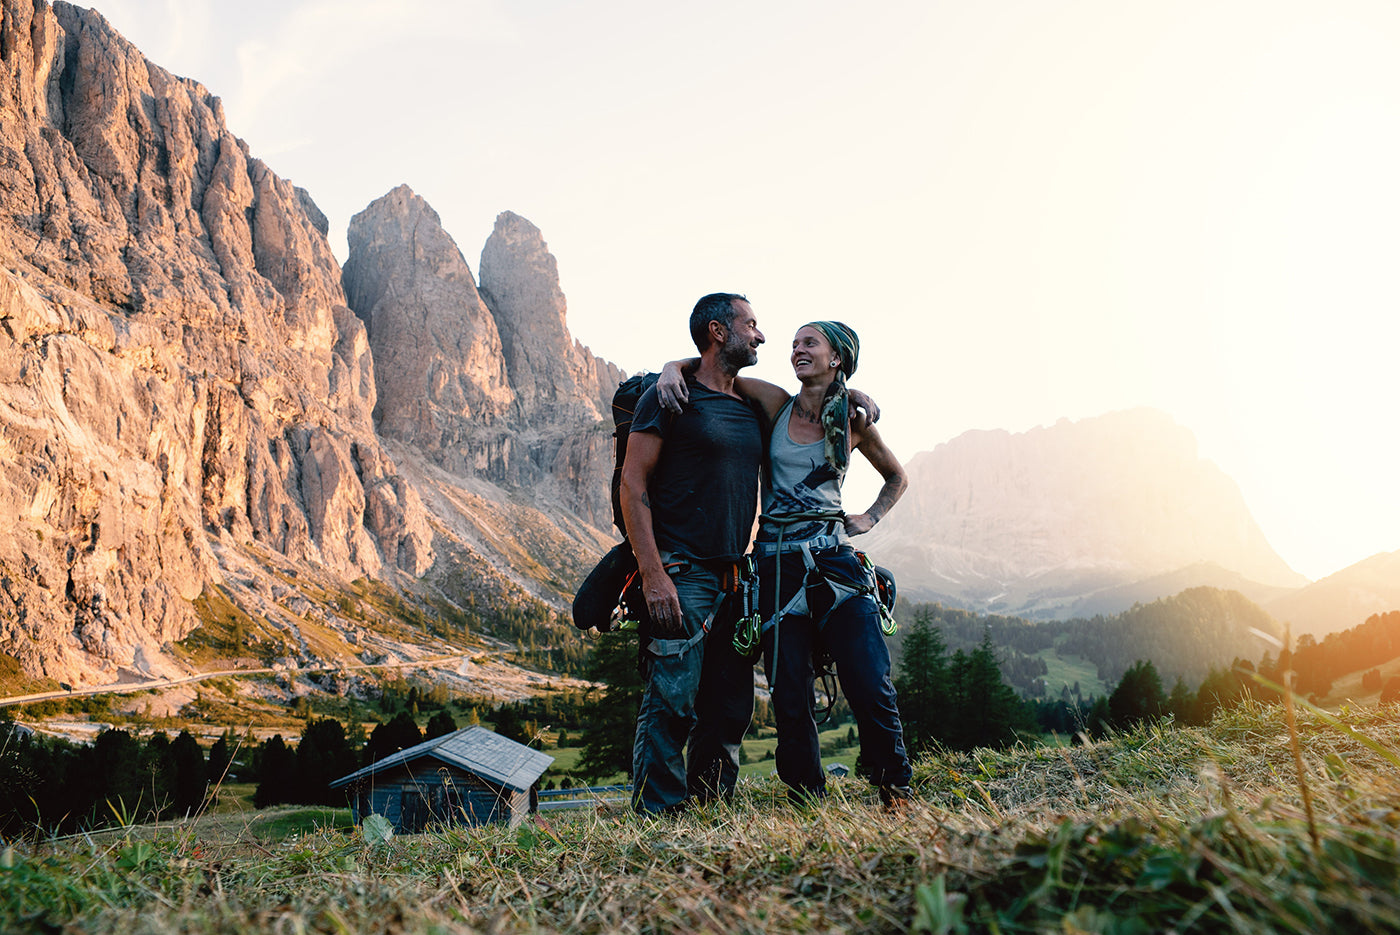 Kai Branss and his partner Julie posing for a picture outdoors in front of mountains on their travels to Corsica. (Photo: Kai Branss)